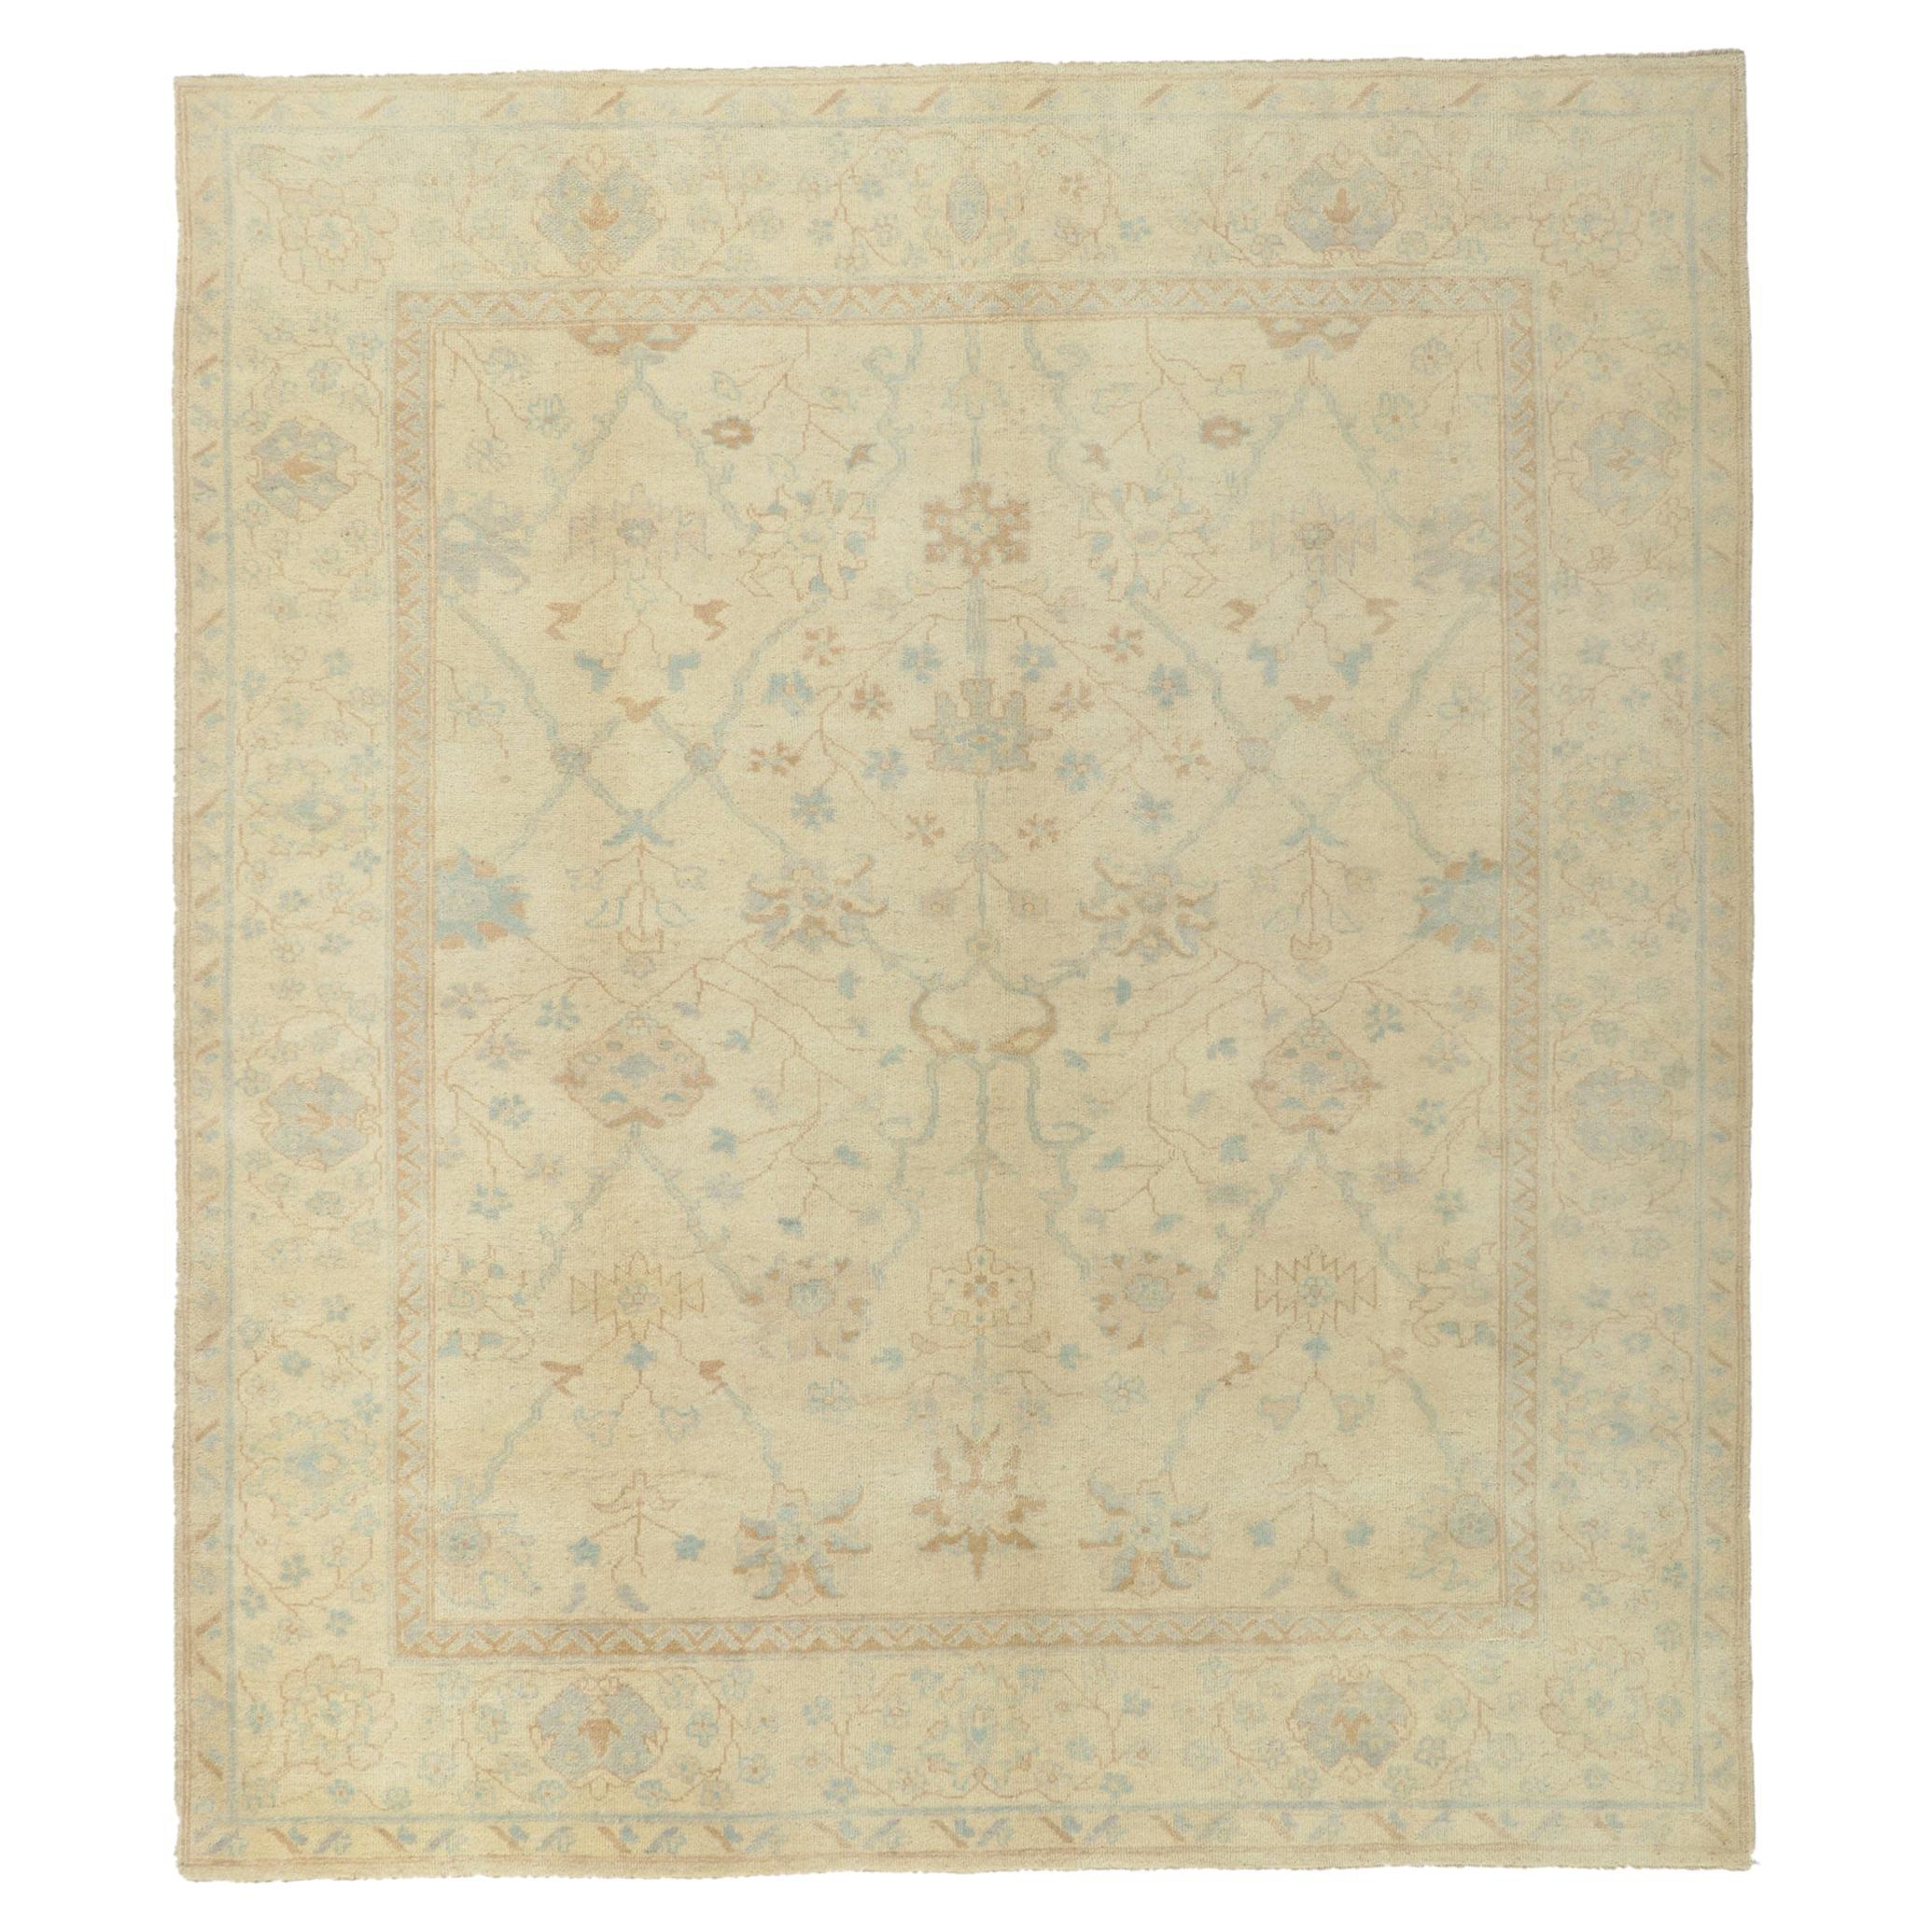 New Transitional Oushak Rug with Soft Earth-Tone Colors For Sale